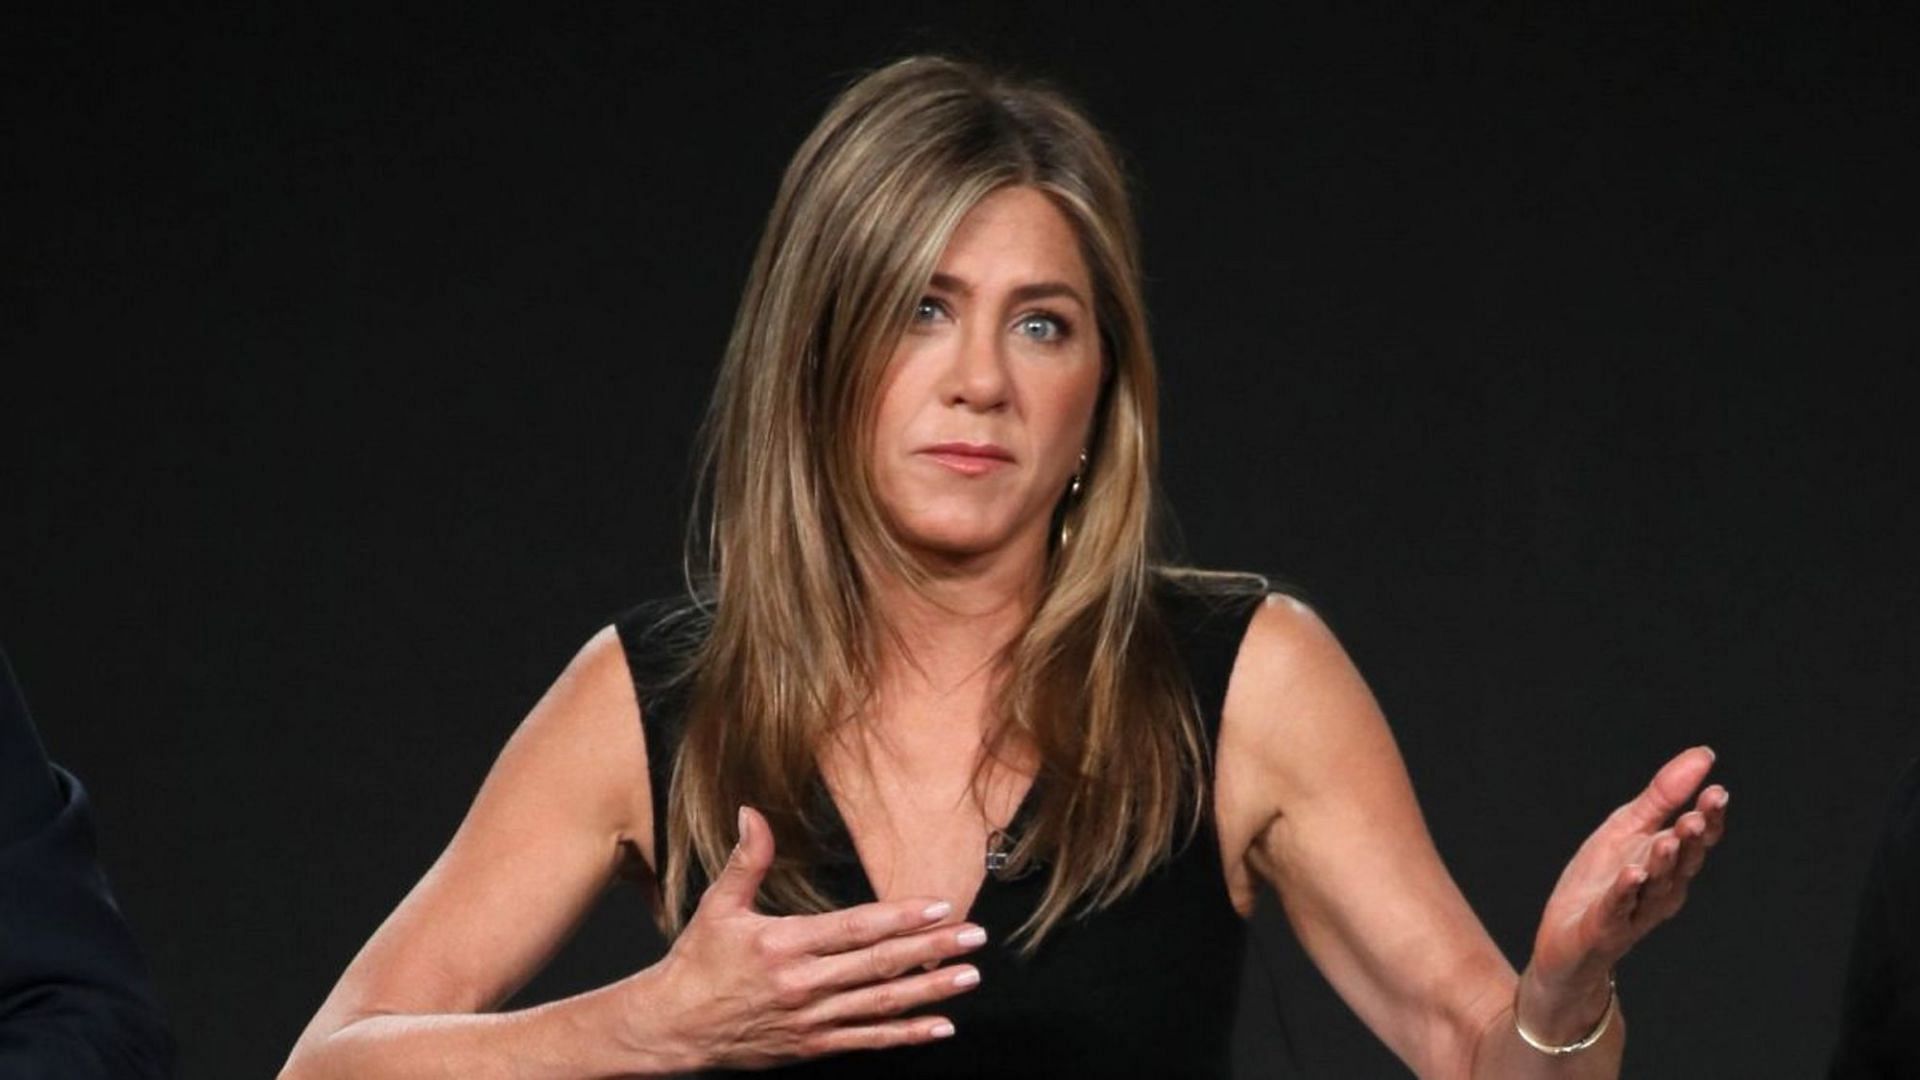 Jennifer Aniston slammed for comments on influencers (Image via Getty Images)